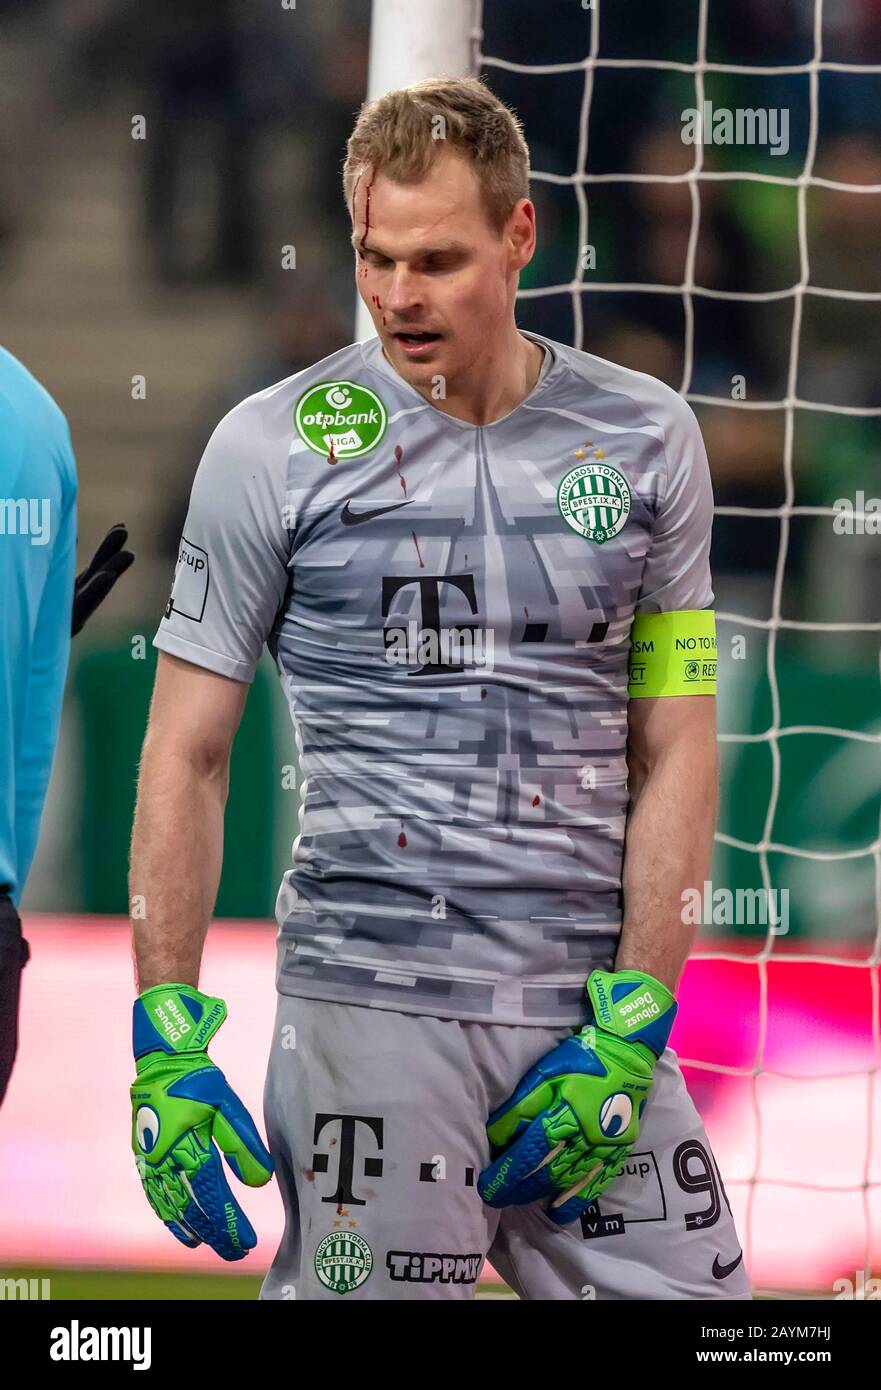 BUDAPEST, HUNGARY - FEBRUARY 15: Denes Dibusz of Ferencvarosi TC bleeds after an injury during the Hungarian OTP Bank Liga match between Ferencvarosi TC and MOL Fehervar FC at Groupama Arena on February 15, 2020 in Budapest, Hungary. Stock Photo